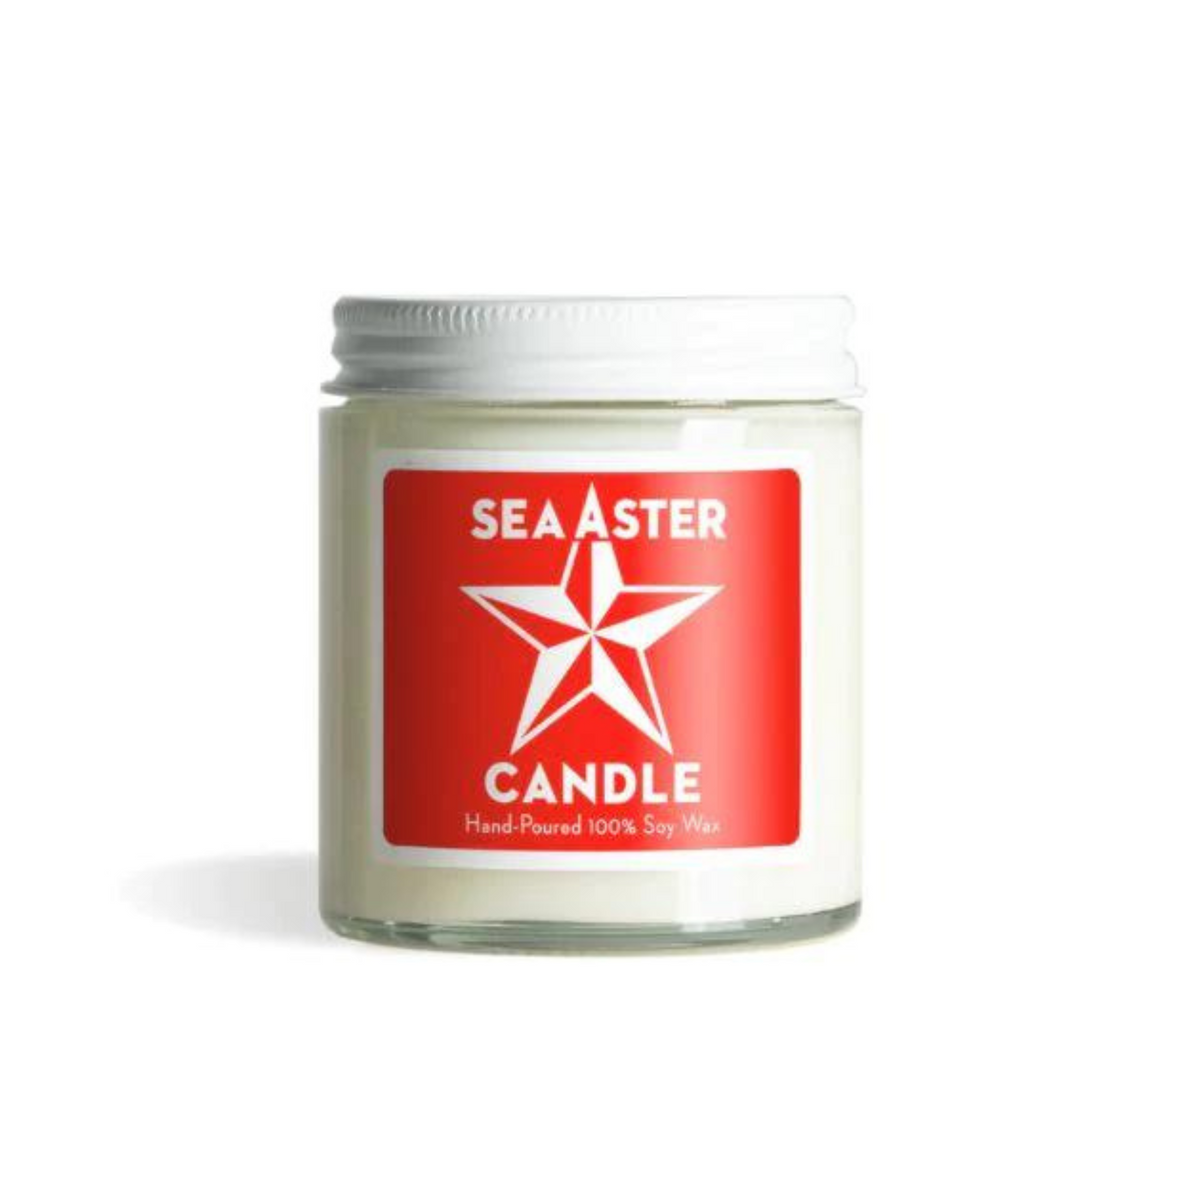 Primary Image of Sea Aster Jar Candle